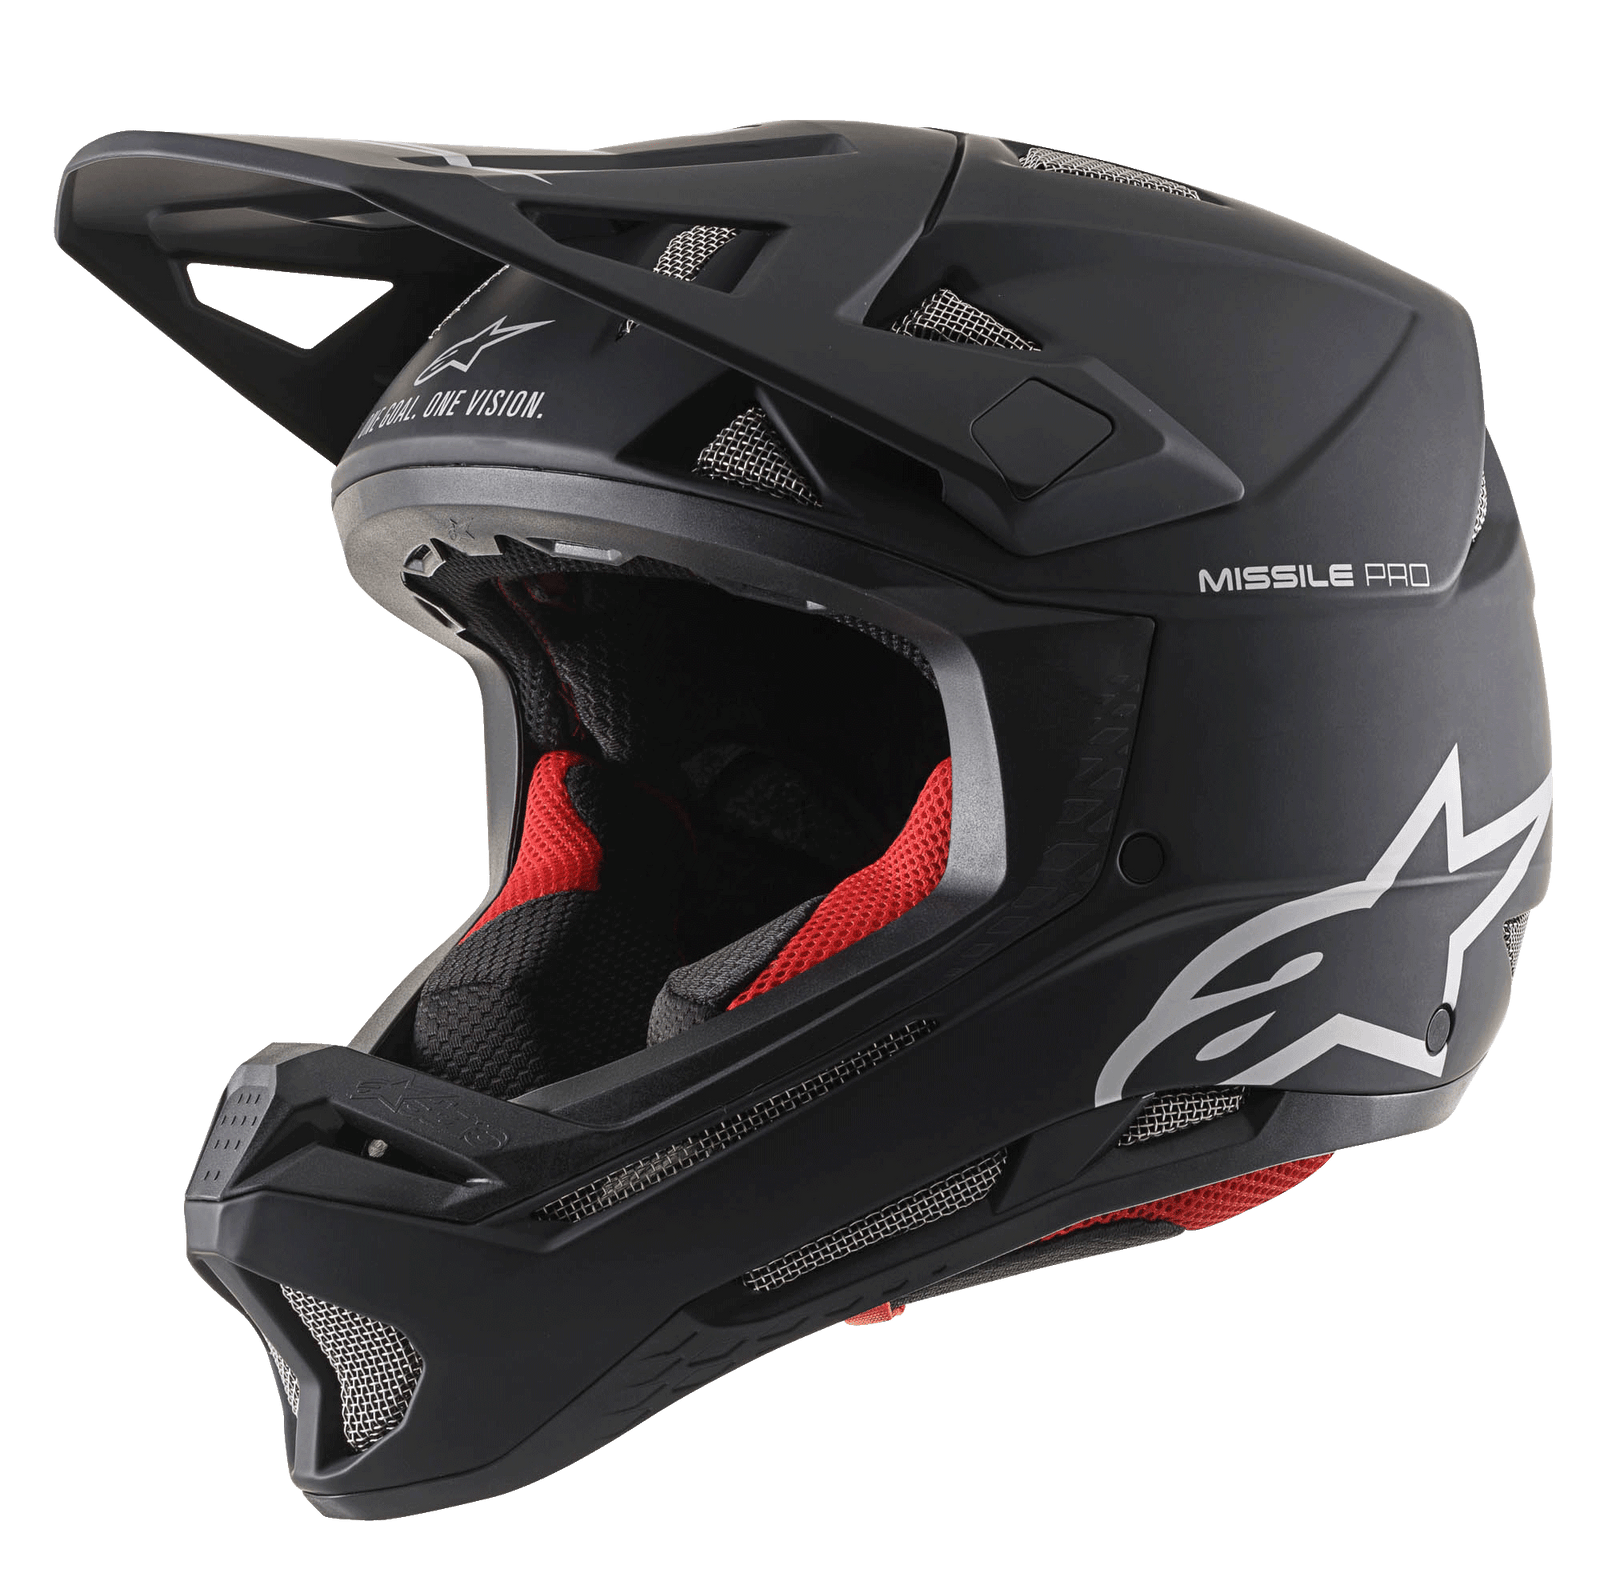 Missile Pro Solid Casque